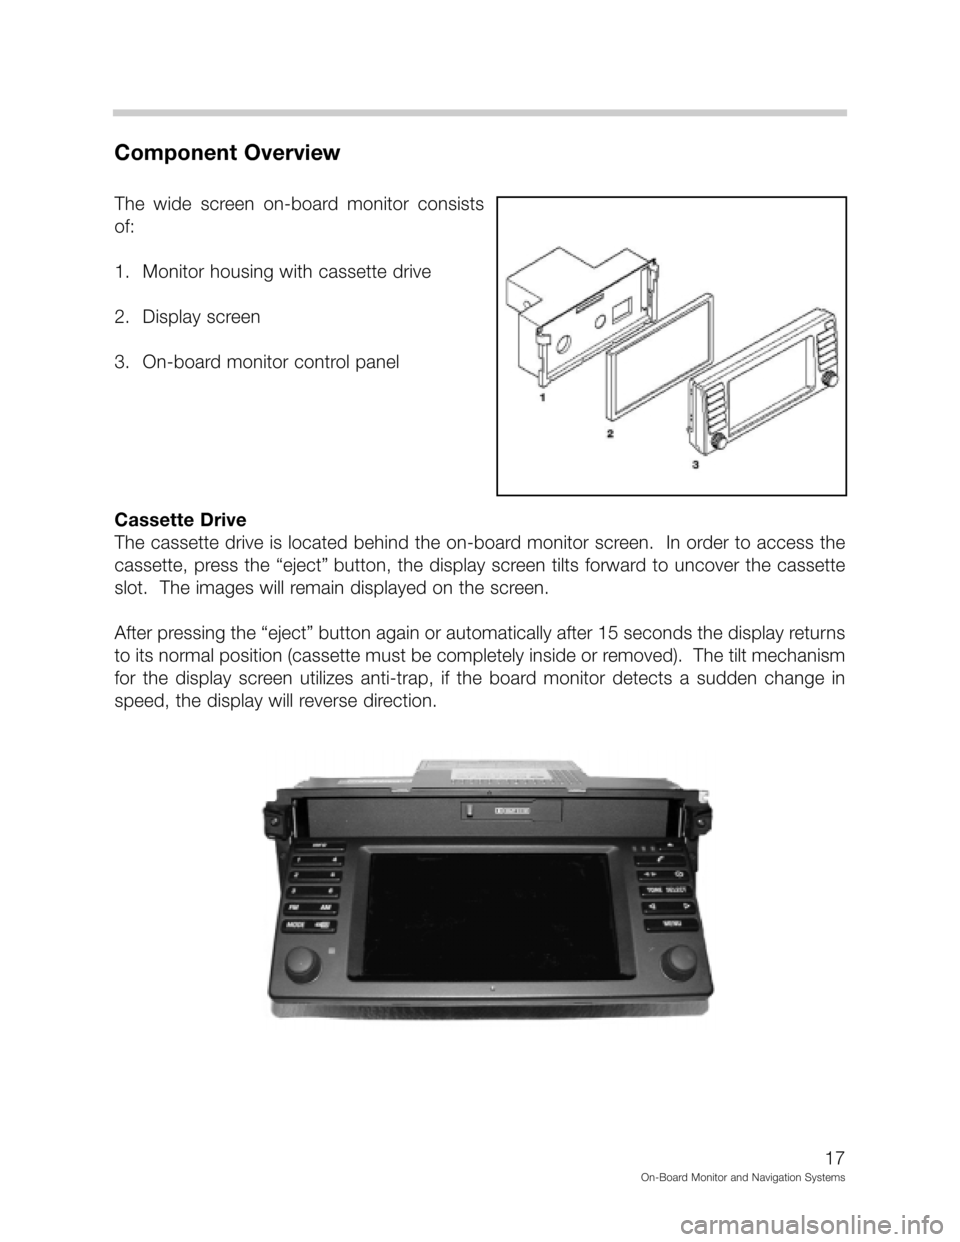 BMW 5 SERIES 1997 E39 On Board Monitor System User Guide *,



"&
(	
2./!!,, 7
# % 
 
 	
 


* 

%&
 

. 
	


